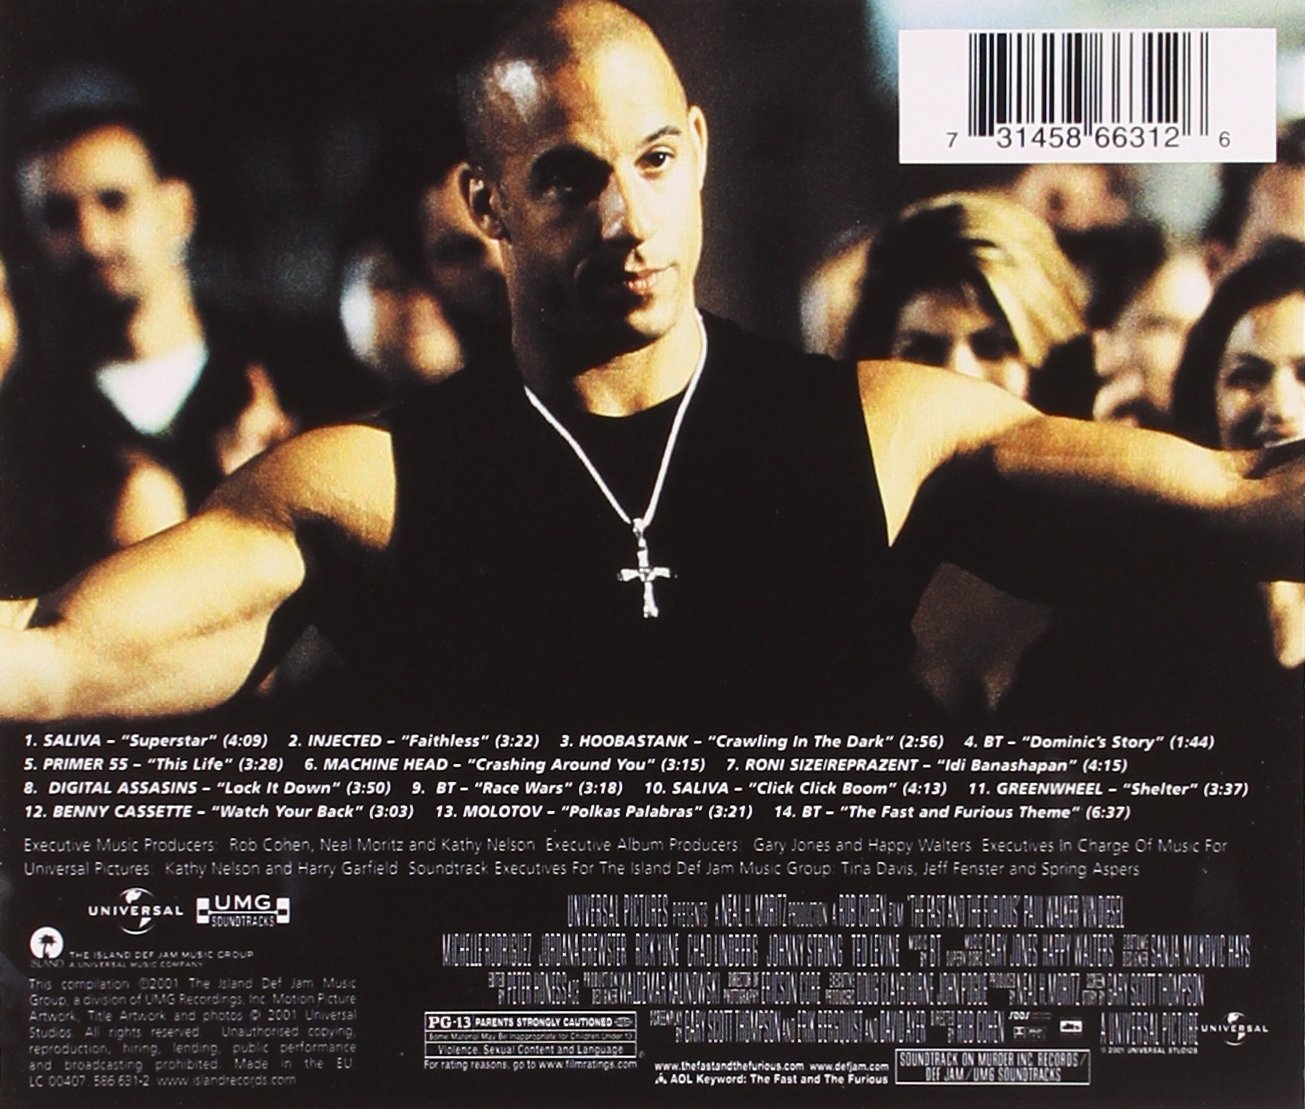 all fast and furious soundtracks